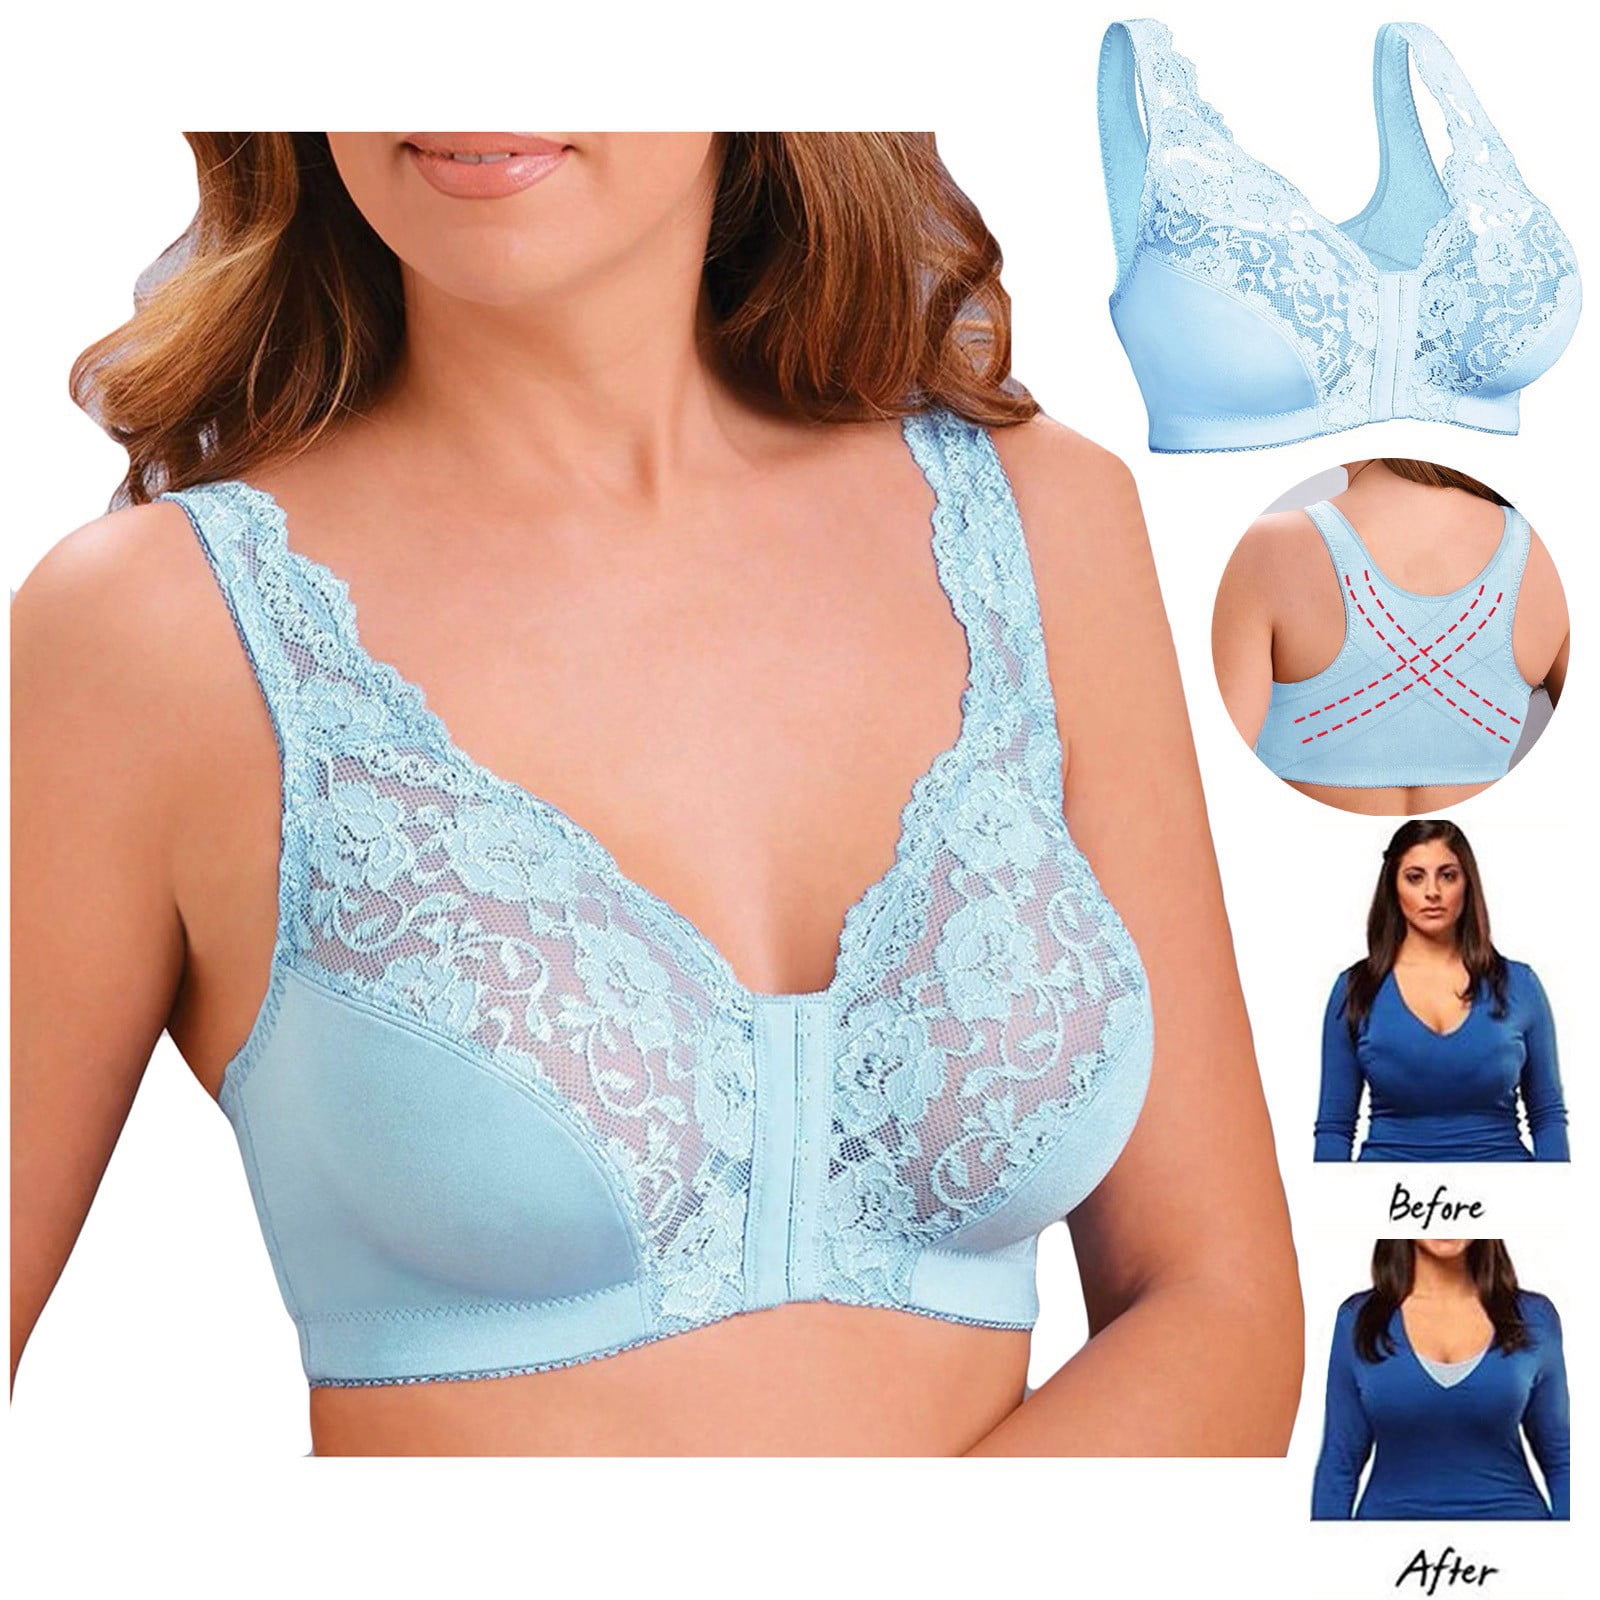 Kddylitq Plus Size Bras With Back Fat Coverage Racerback Smoothing